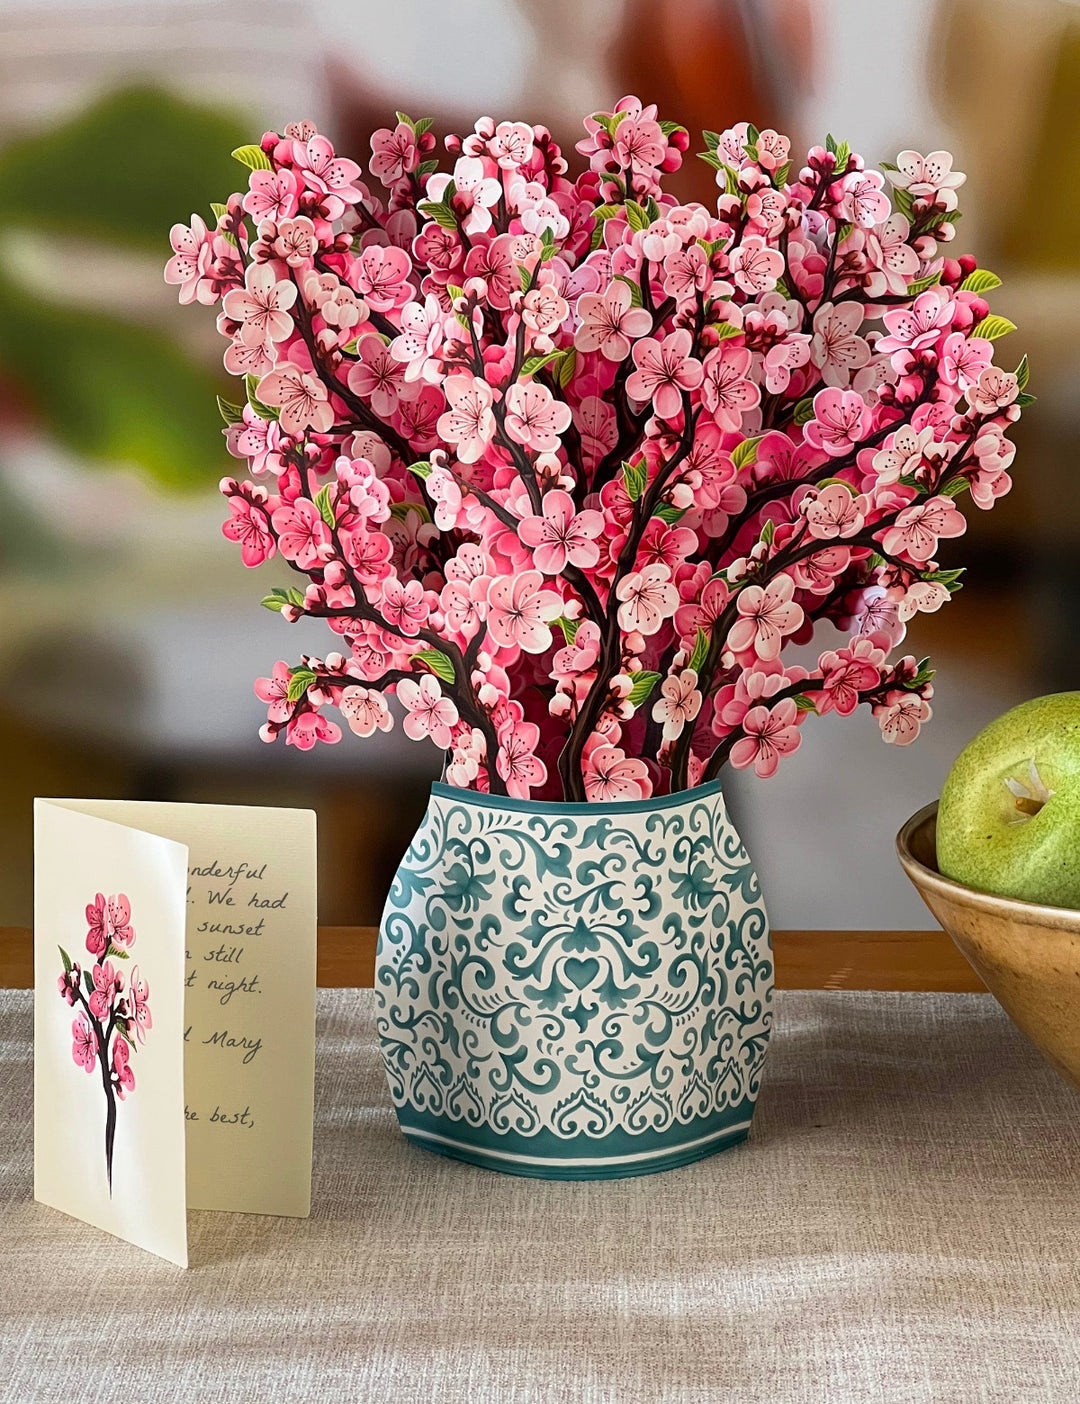 Our FreshCut Paper Cherry Blossoms come ready to present in their own festive blue and white patterned vase. More than a greeting card, our flowers are always FreshCut Paper that never wilt, fade or require water.